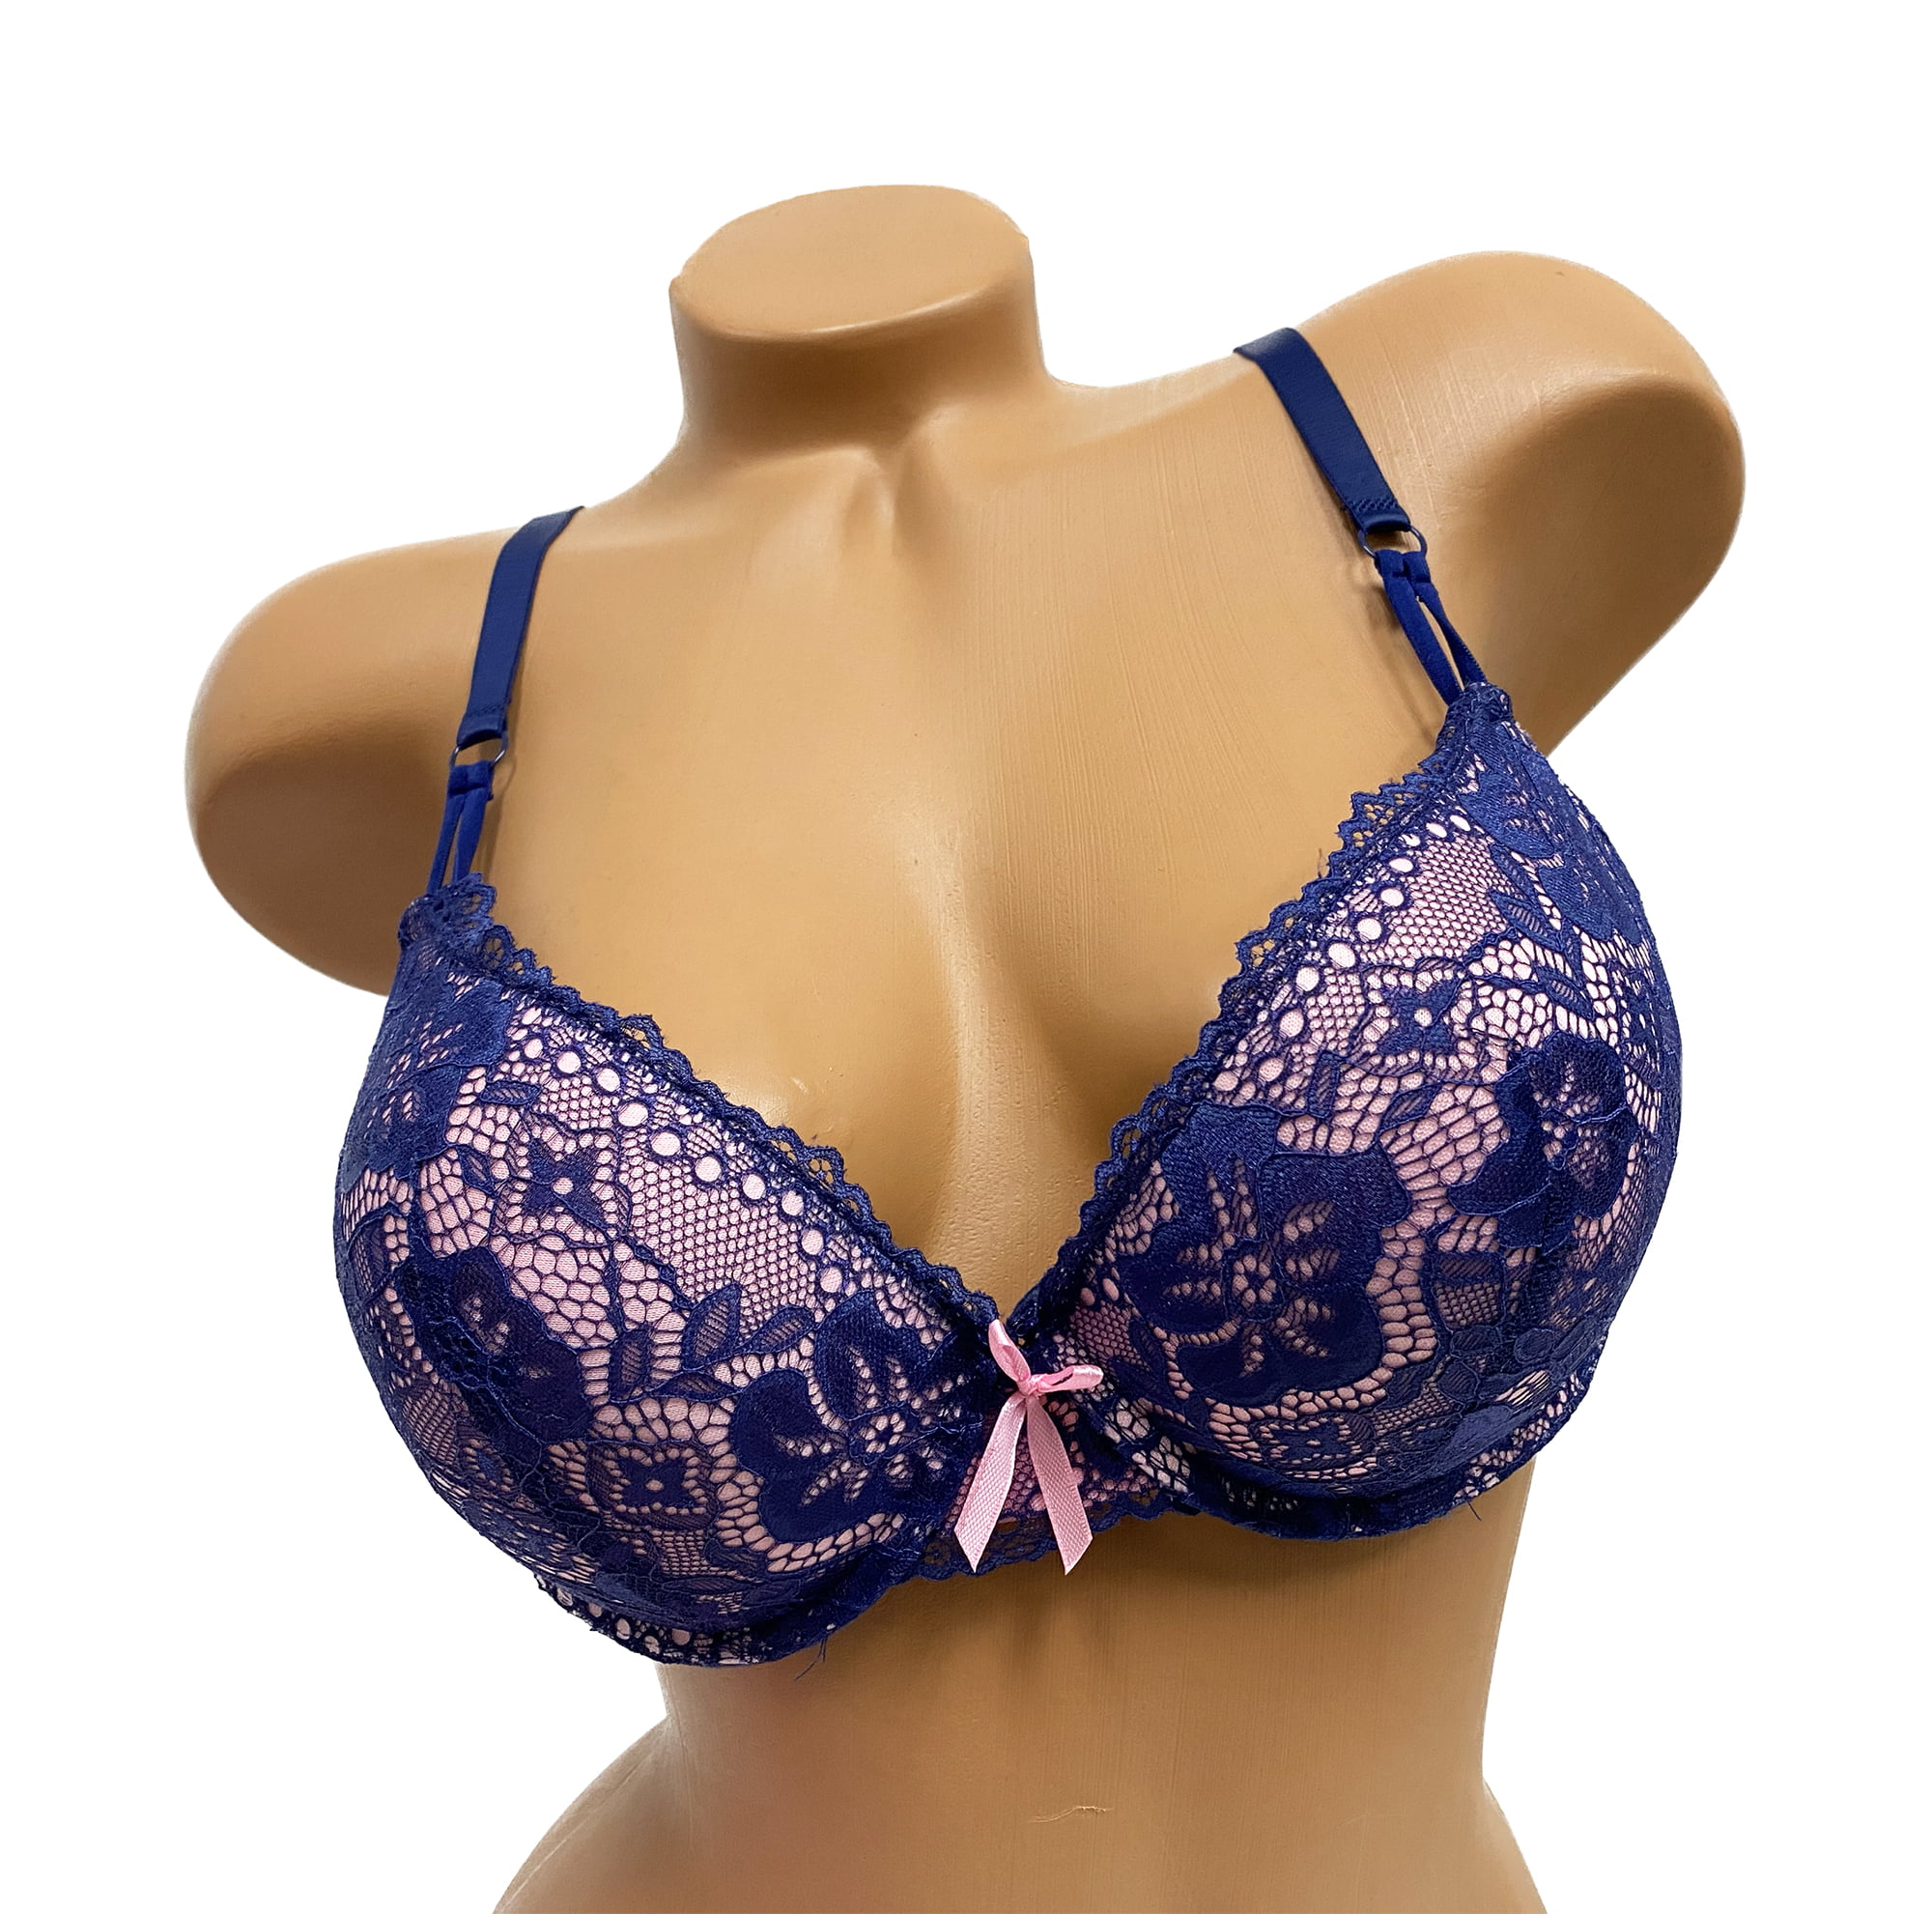 Women Bras 6 Pack of Double Pushup Lace Bra B cup C cup Size 32B (S9905)